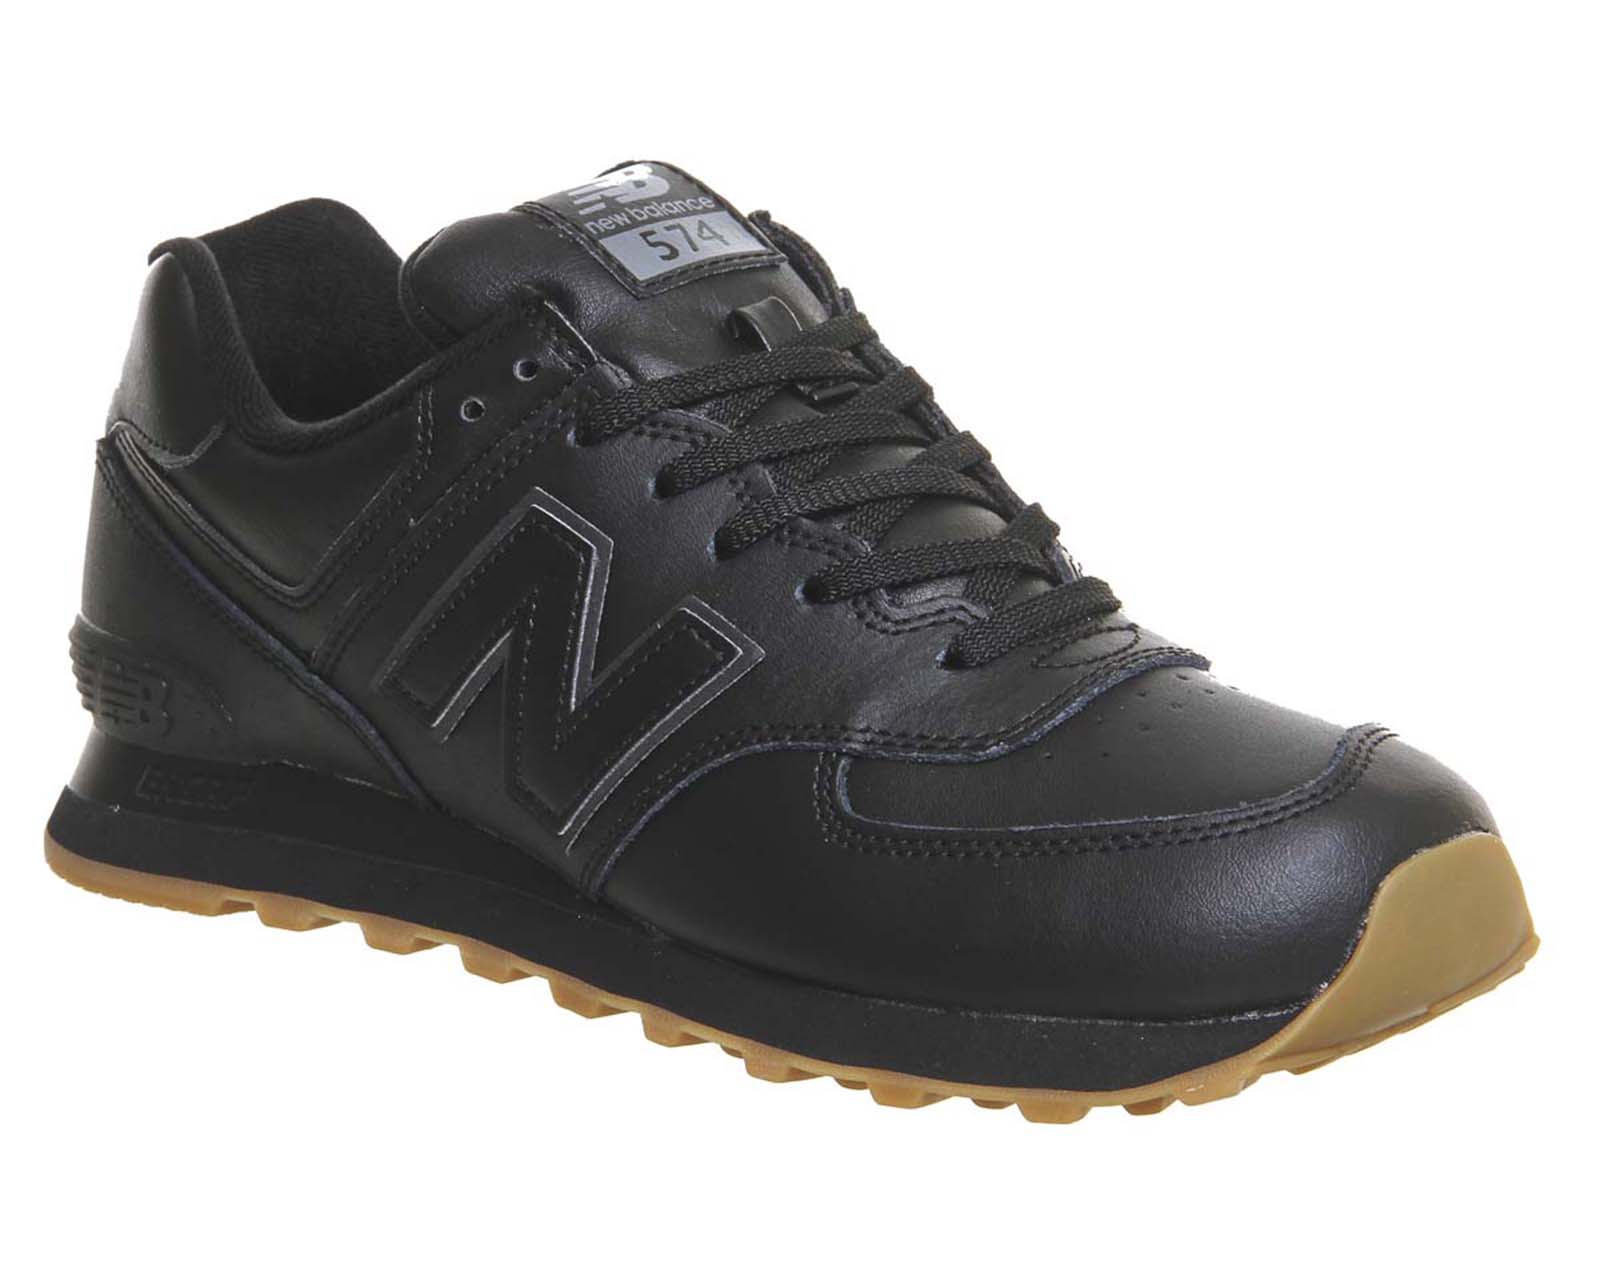 new balance black leather trainers